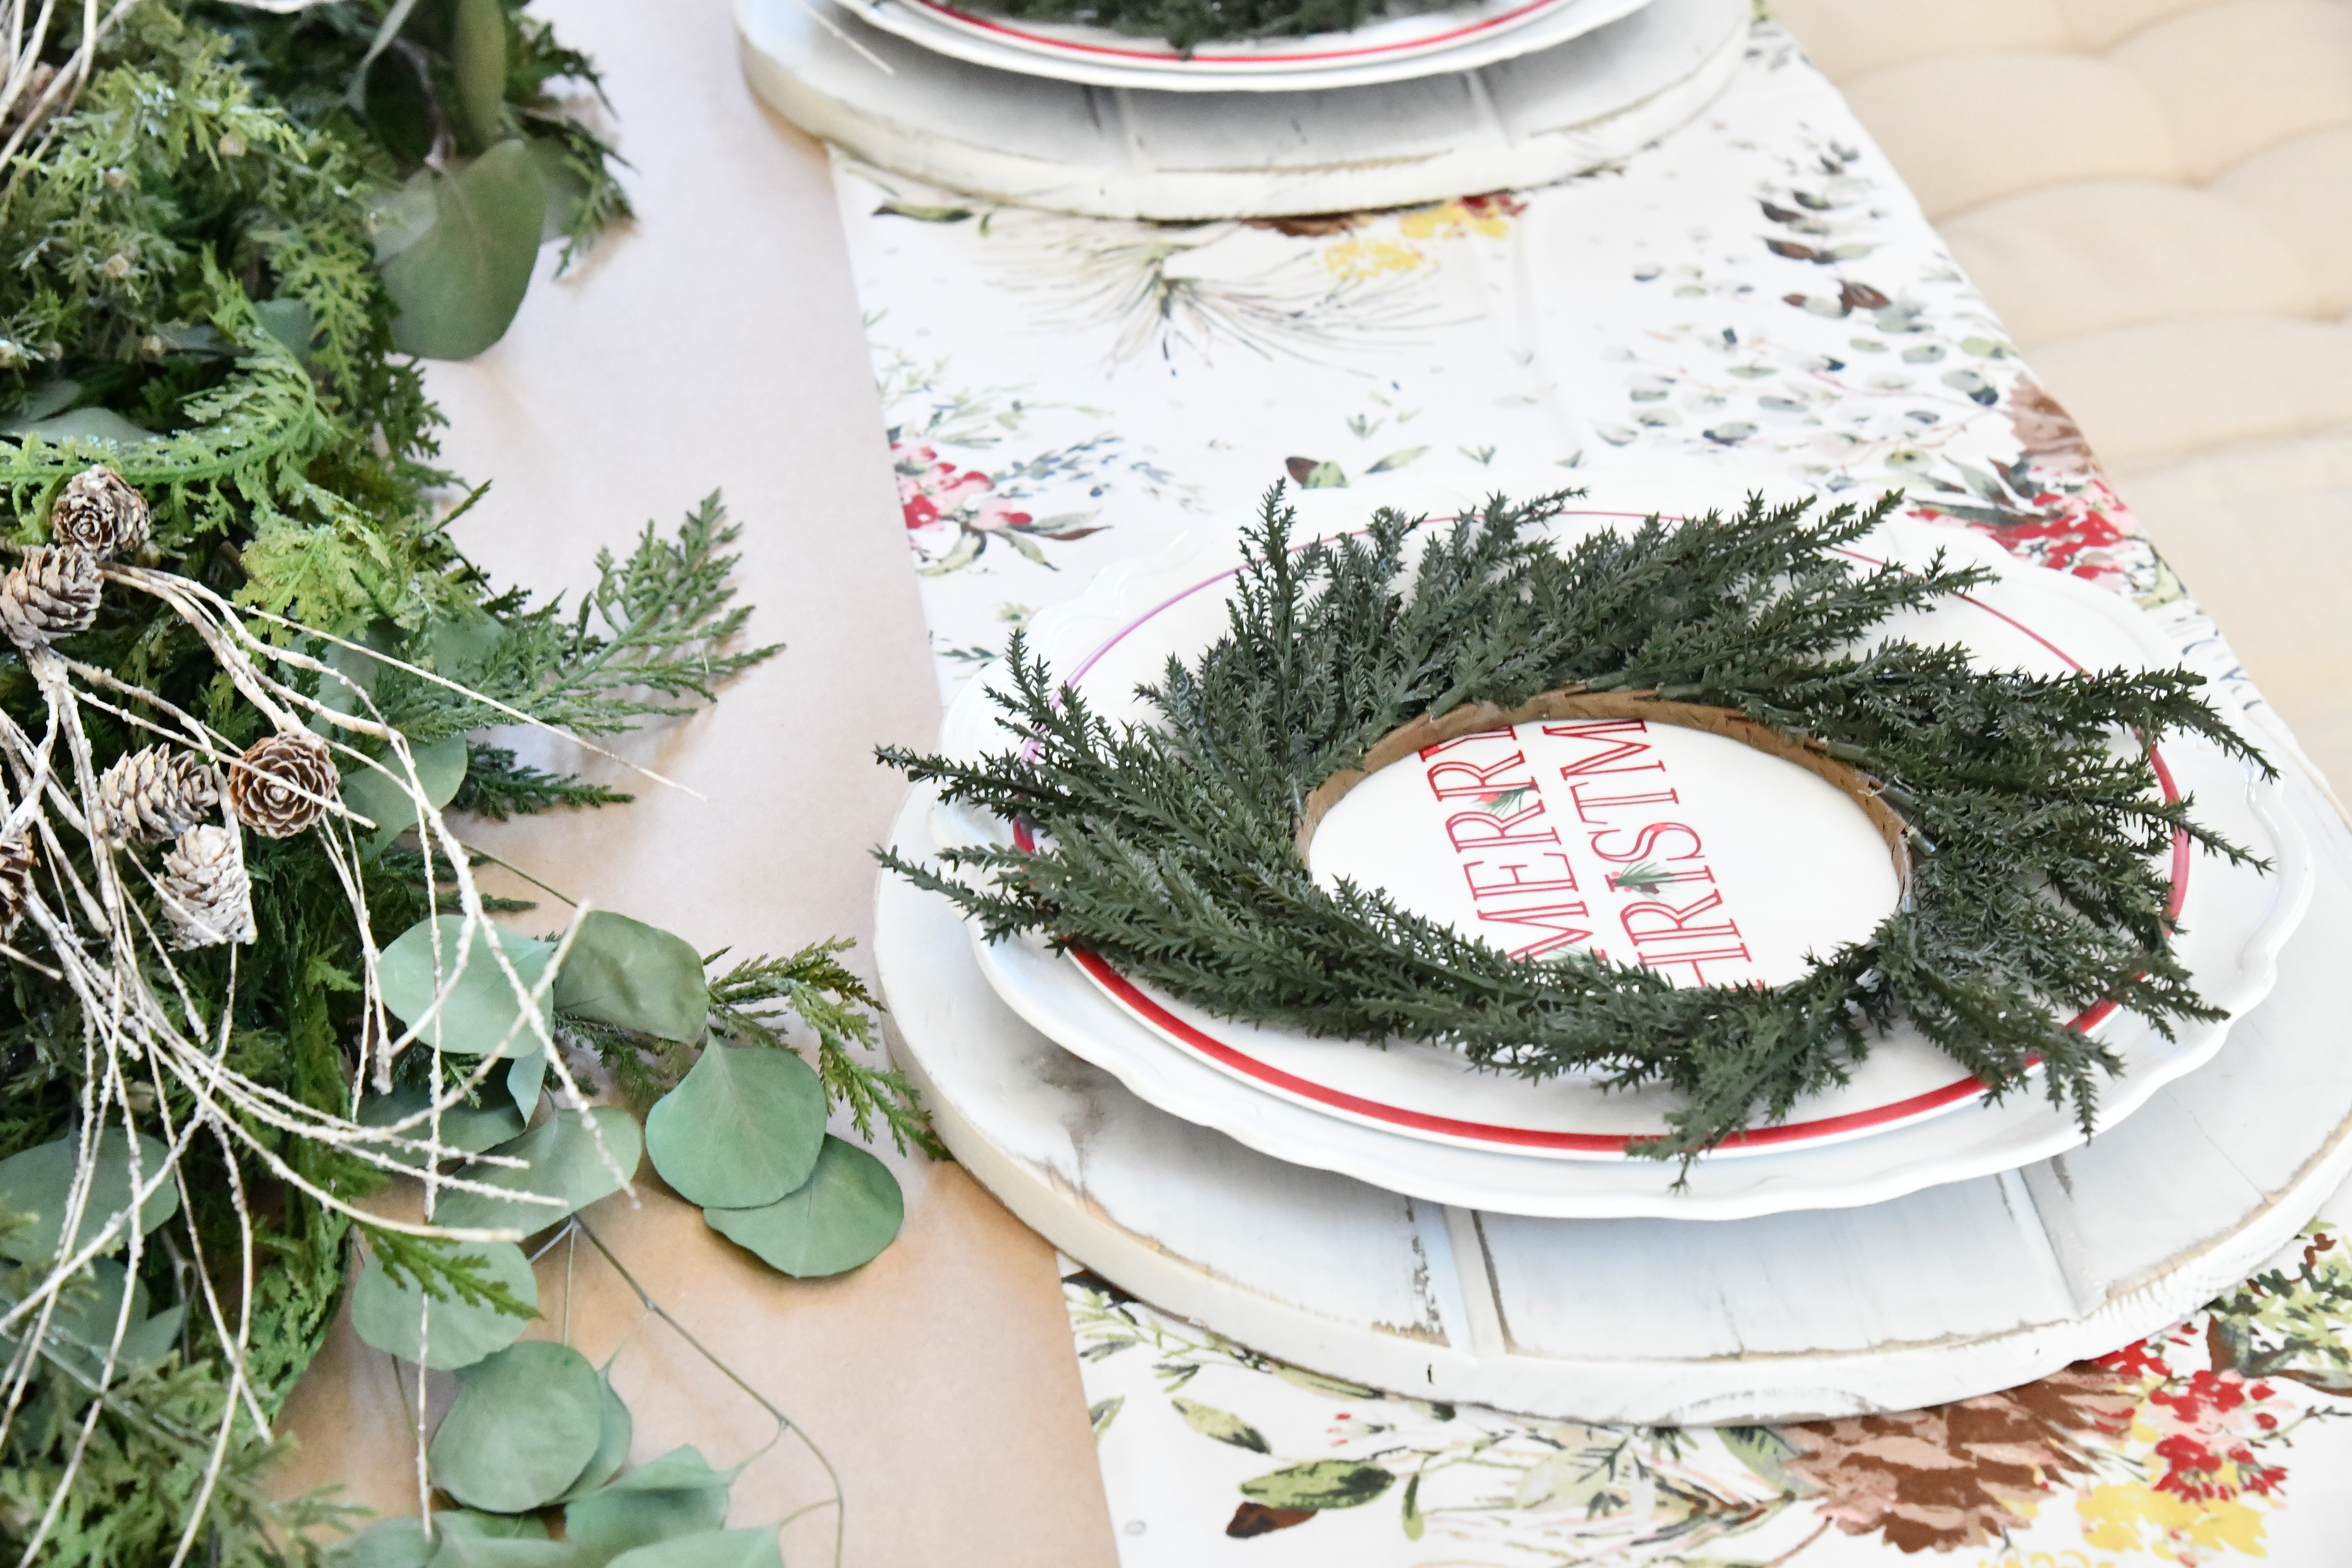 Small wreath on top of plates 